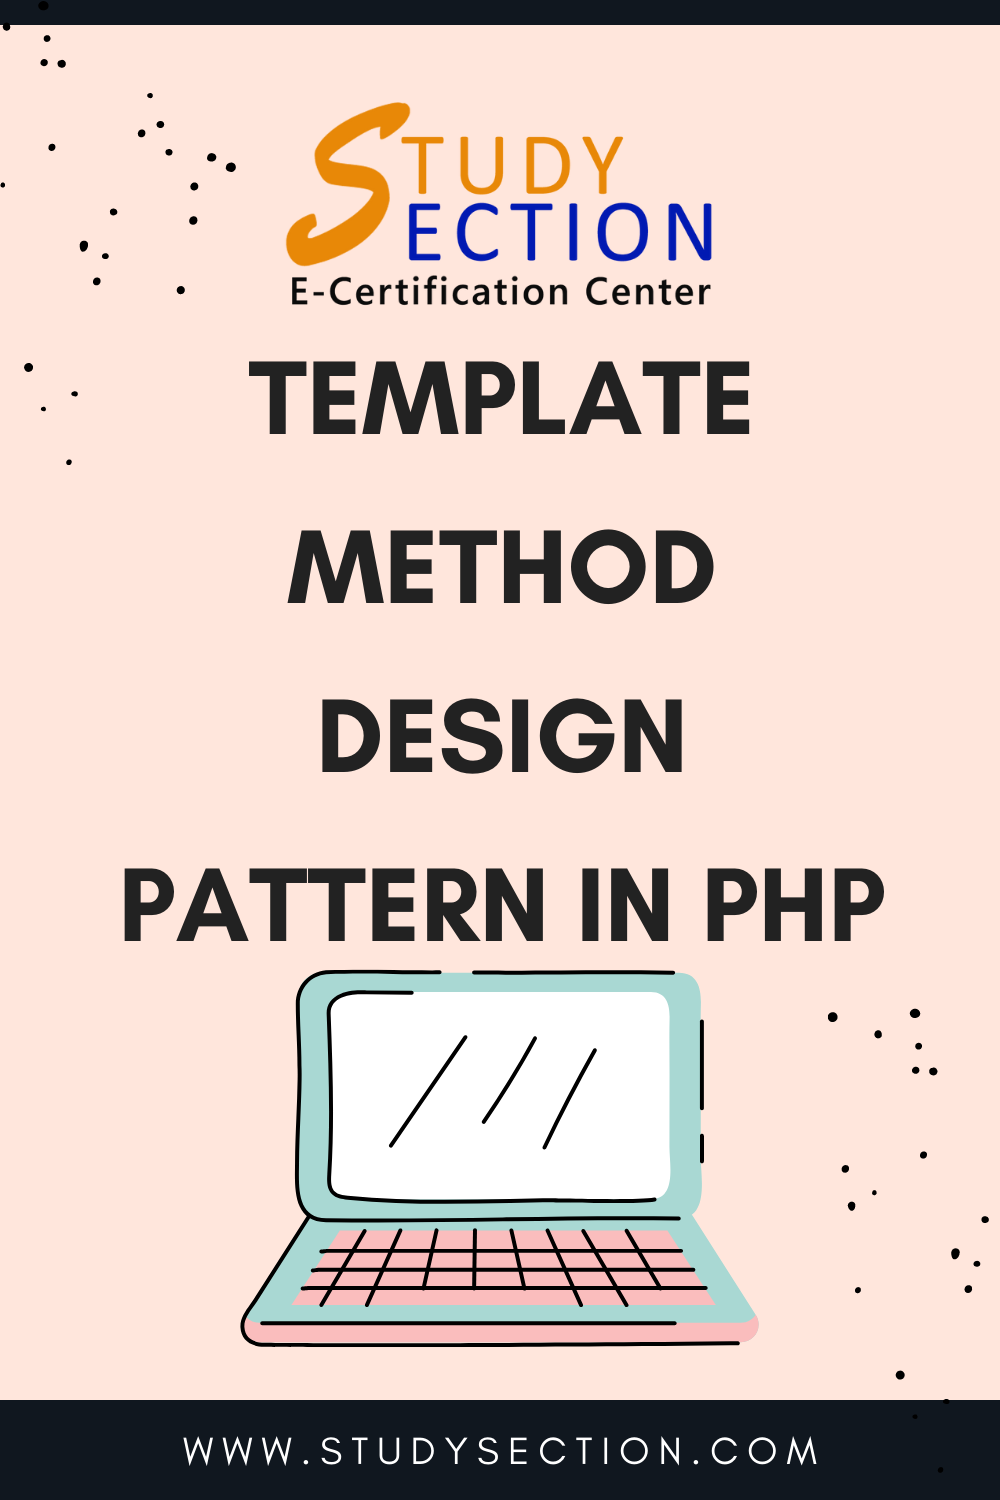 Template Method design pattern in PHP — SS Blog